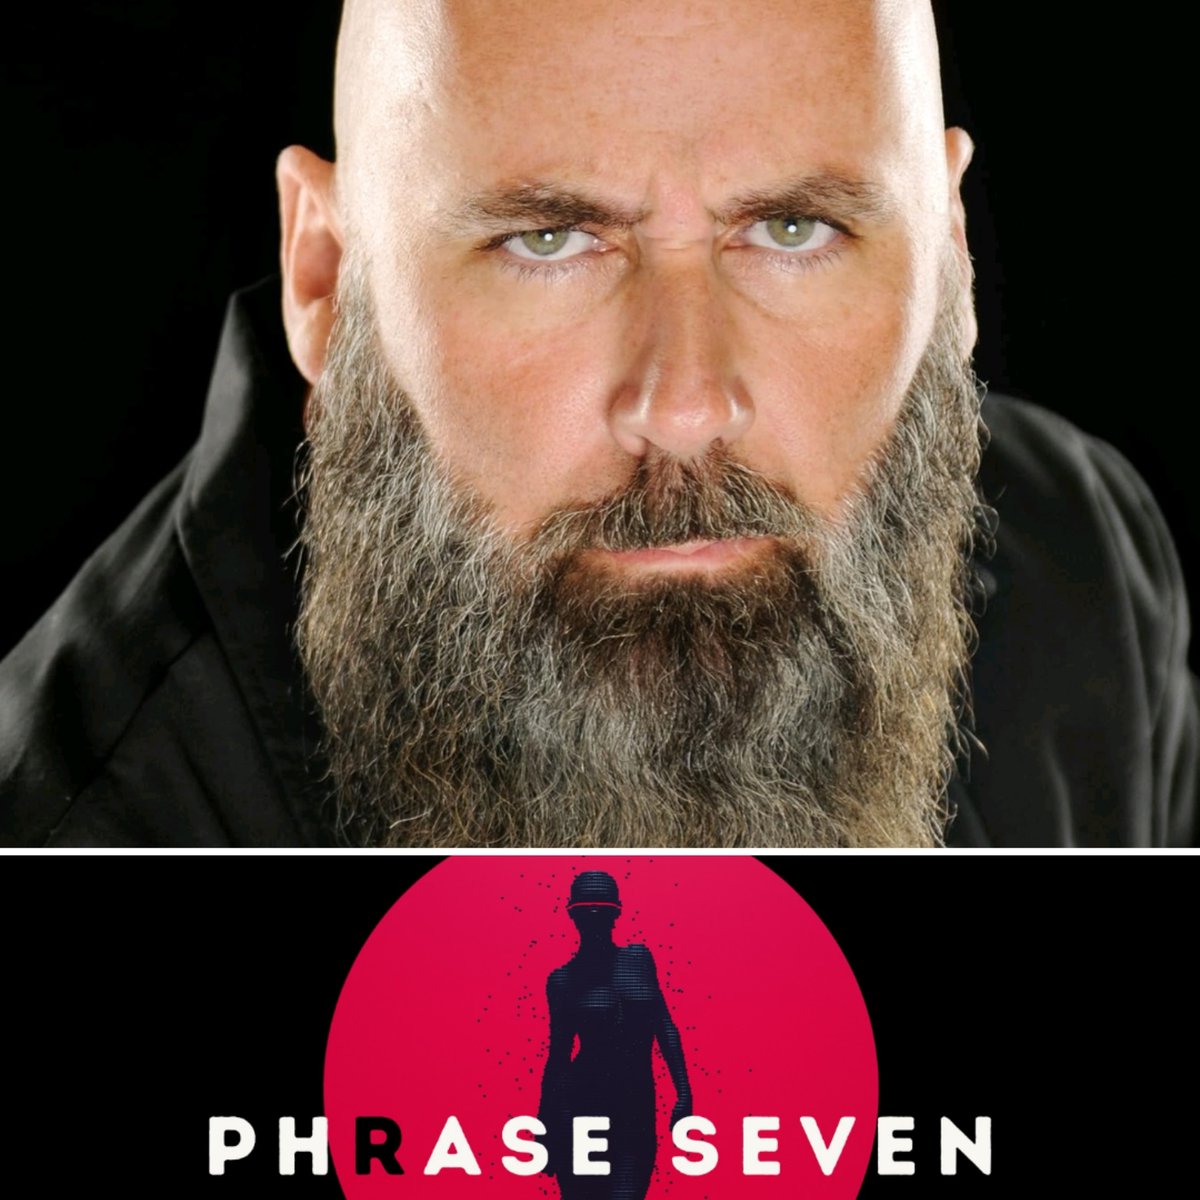 CASTING ANNOUNCEMENT

Actor Chad Joyce has been officially cast in the upcoming Phrase Seven Series, based on the novel by @chasehughesofficial

#phrasesevenseries #phrasesevennovel #chasehughes #phraseseven #behaviorspecialist #BehaviorAnalysis